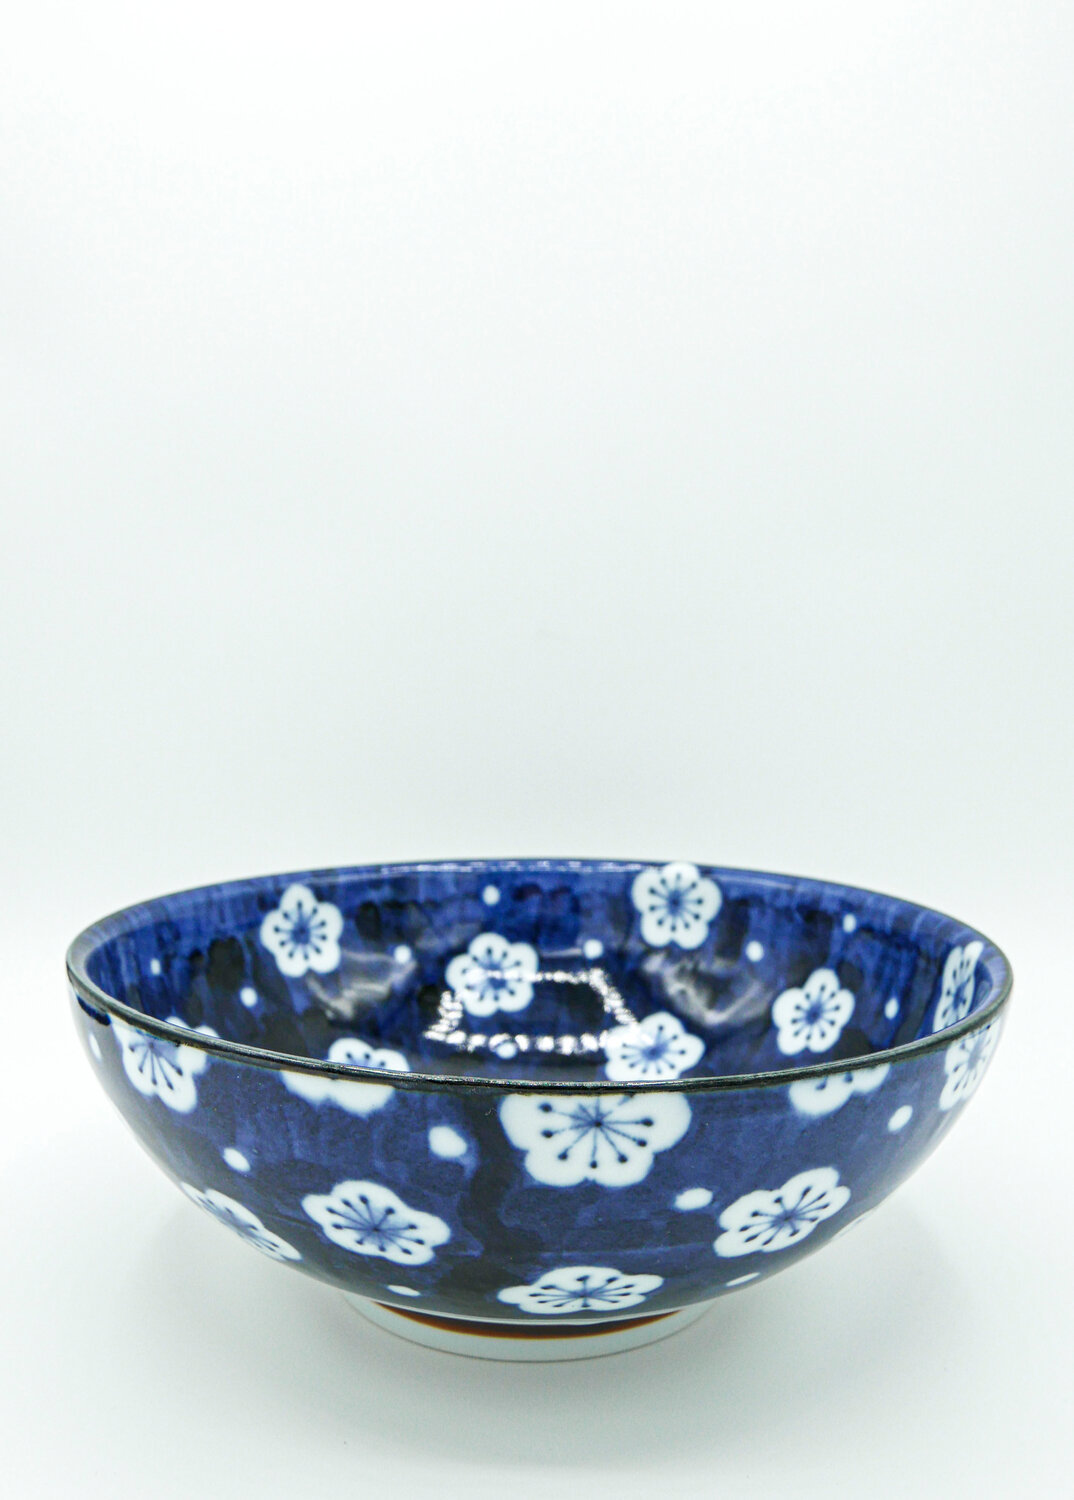 These ceramic bowls bring the fresh colors of summer into your kitchen without the fuss and formality of rigid sets.  Mix and match, from florals to strips in hues of blue.  8”, $17.50;  6 ½“, $17; 6”, $10.50; and the cutest dish with jumping bunnies, just 4.25”, $6.50. Lula’s Pantry 5 Dock Square, Rockport (978) 546-0010 